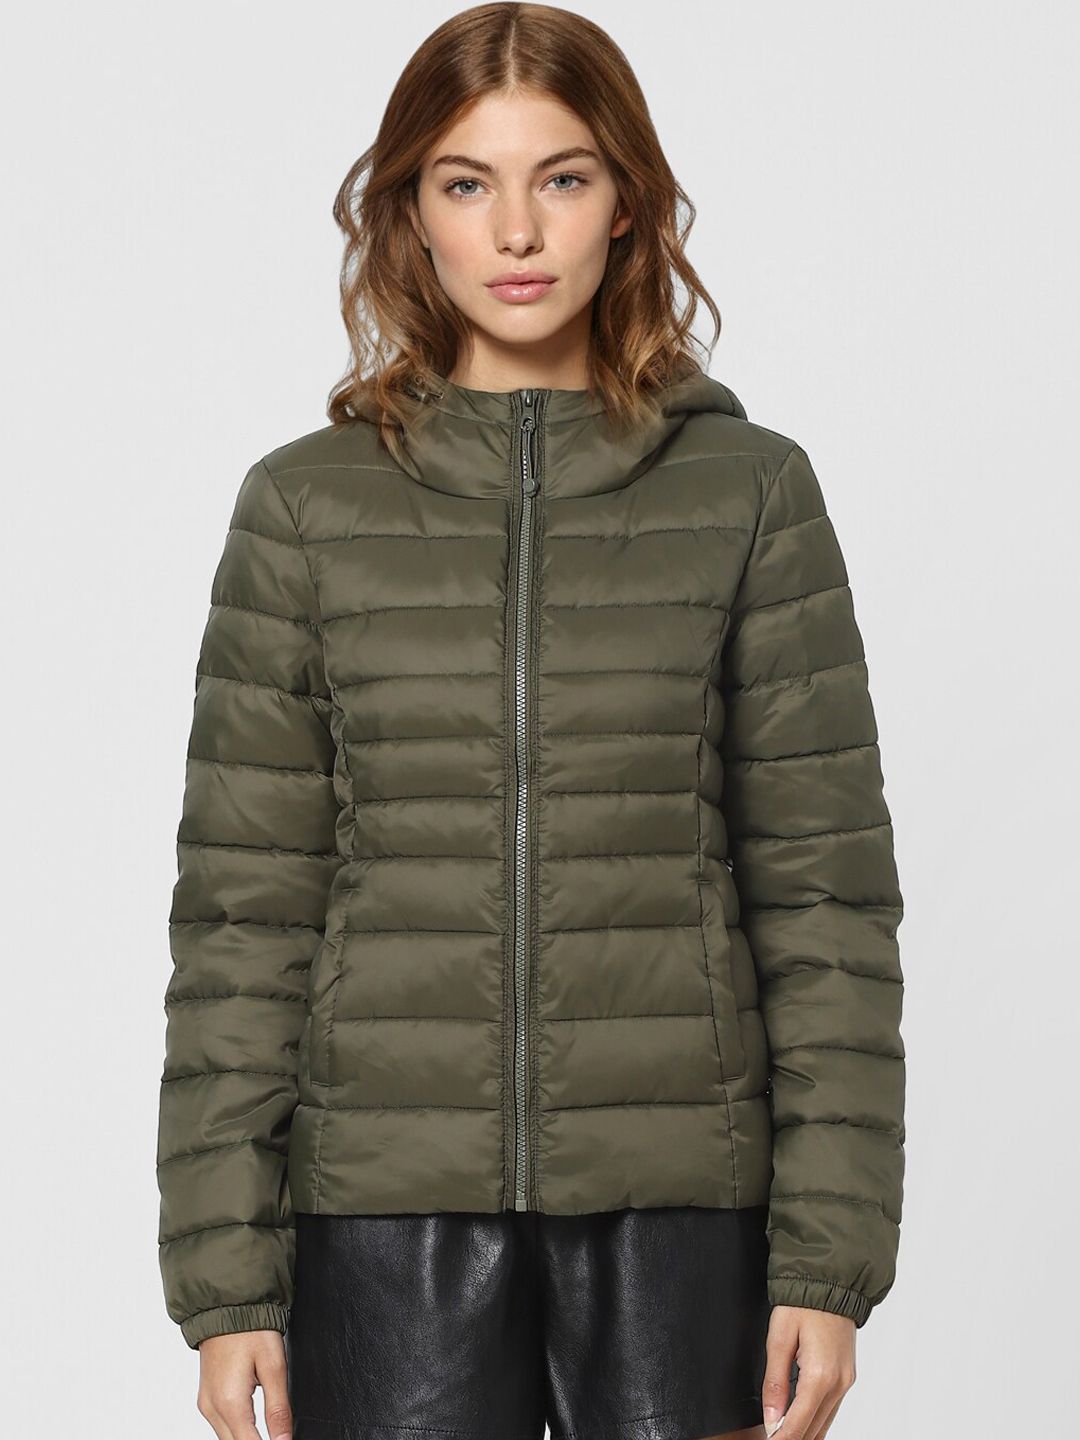 ONLY Women Olive Green Puffer Jacket Price in India